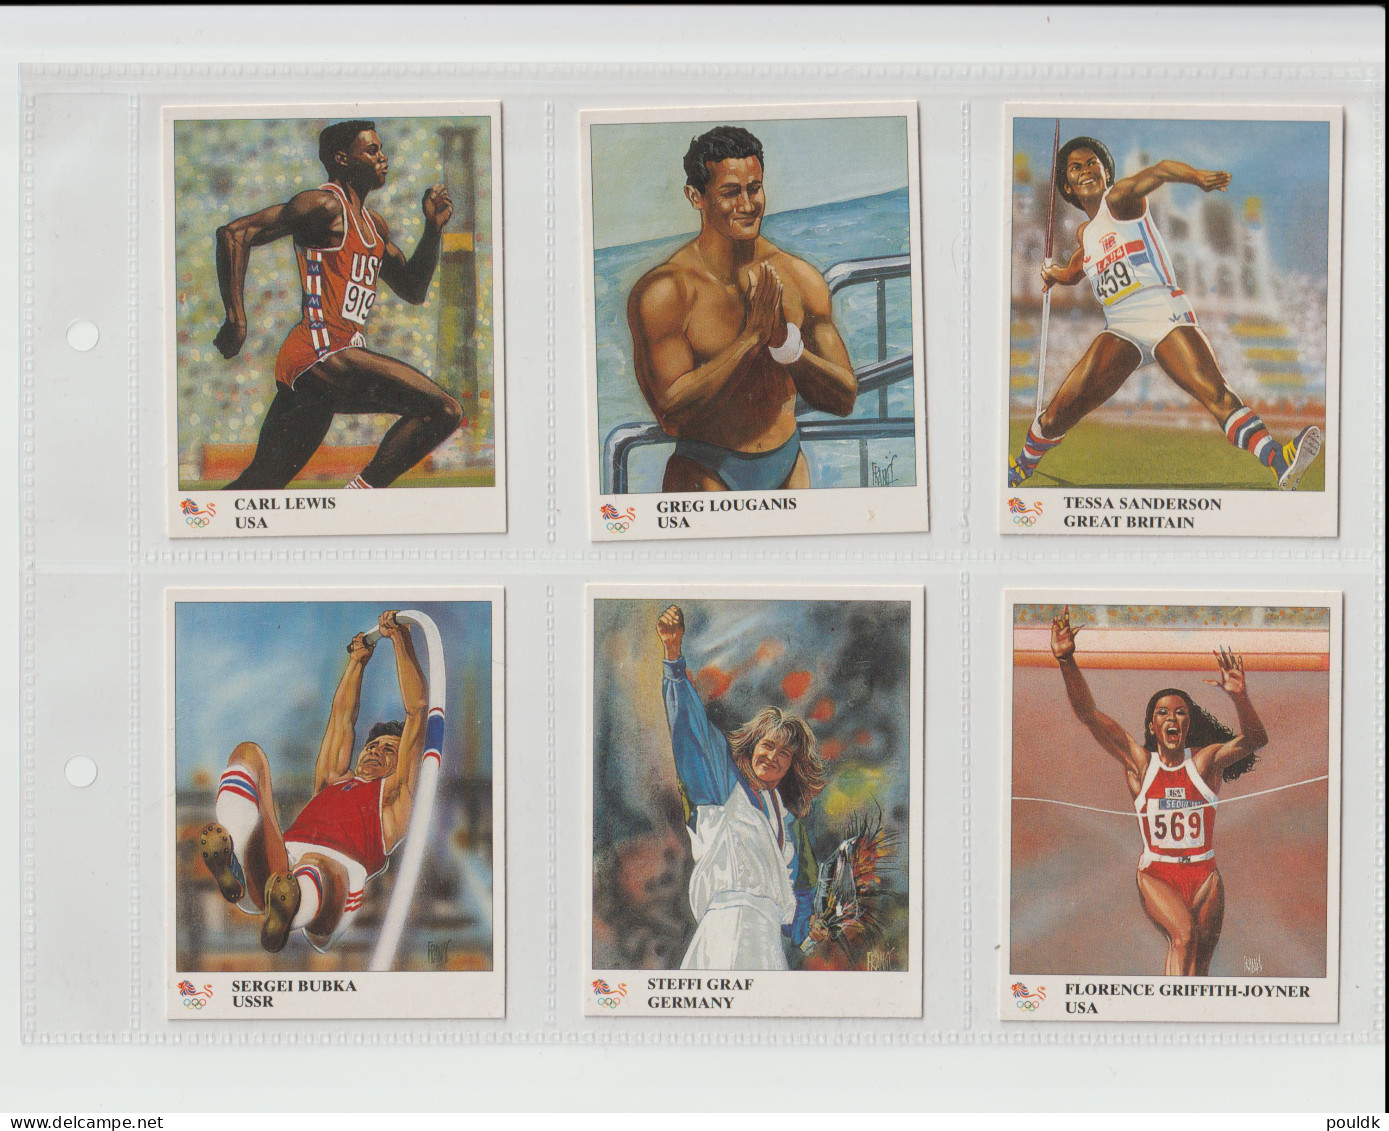 Olympic Champions - 1996 Trading Cards by Imperial Publishing - Part set of 41. Postal weight approx 0,17 kg.